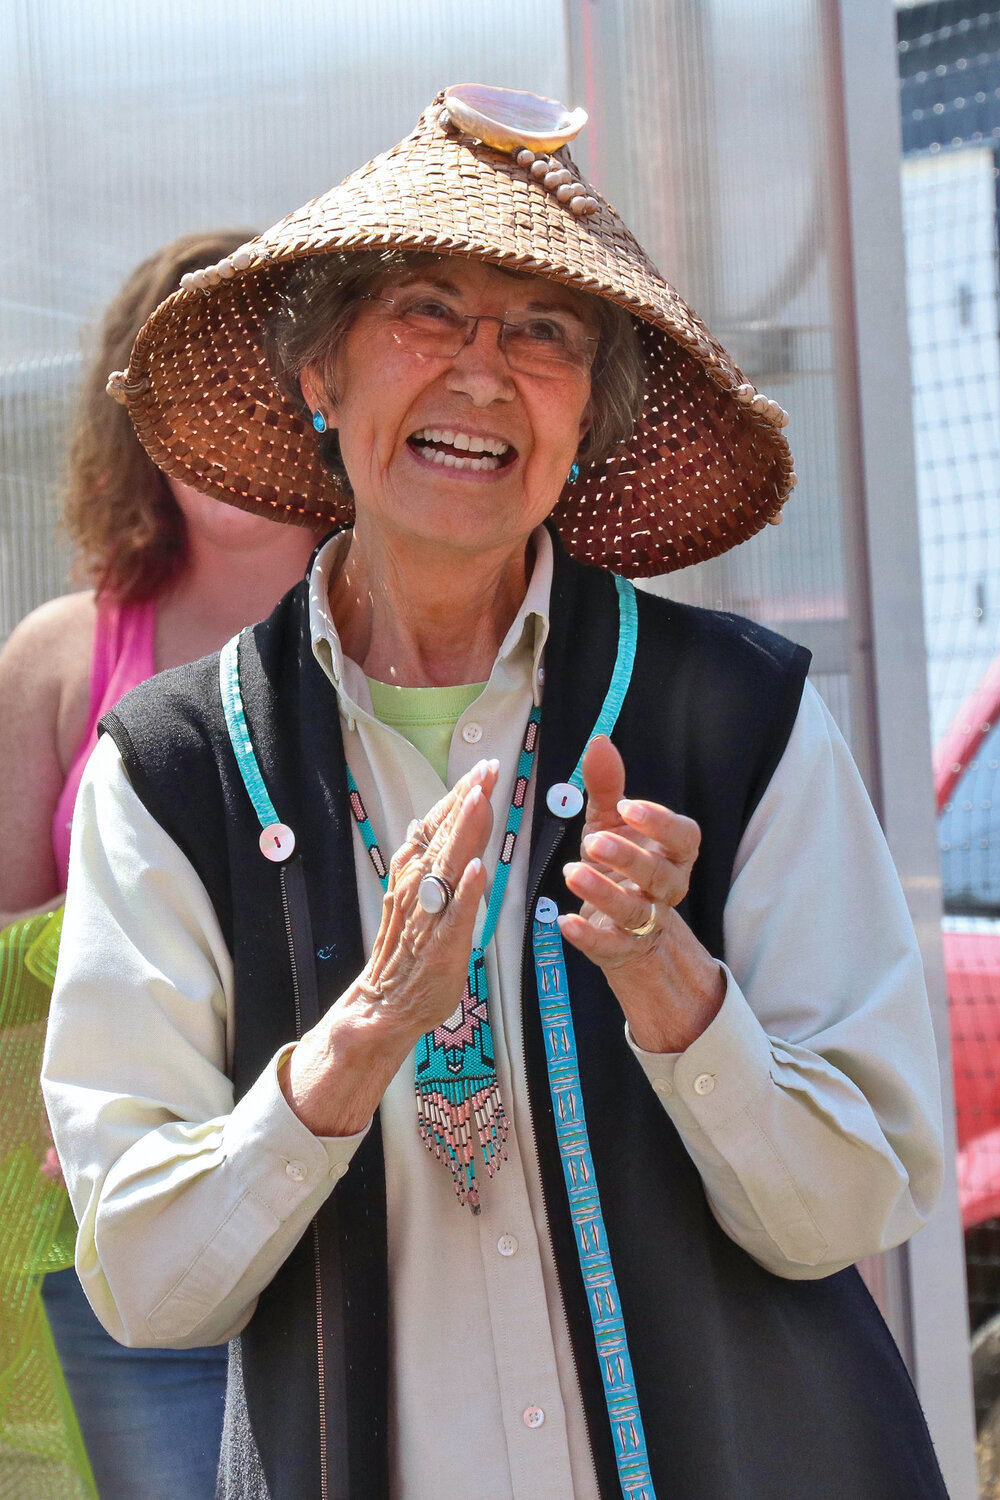 Cowlitz Indian Tribe Elder and Spiritual Leader Tanna Engdahl smiles while giving a speech at a ribbon-cutting and blessing ceremony for the new Toledo Learning Garden greenhouse at Toledo Elementary School on Saturday, Aug. 26.